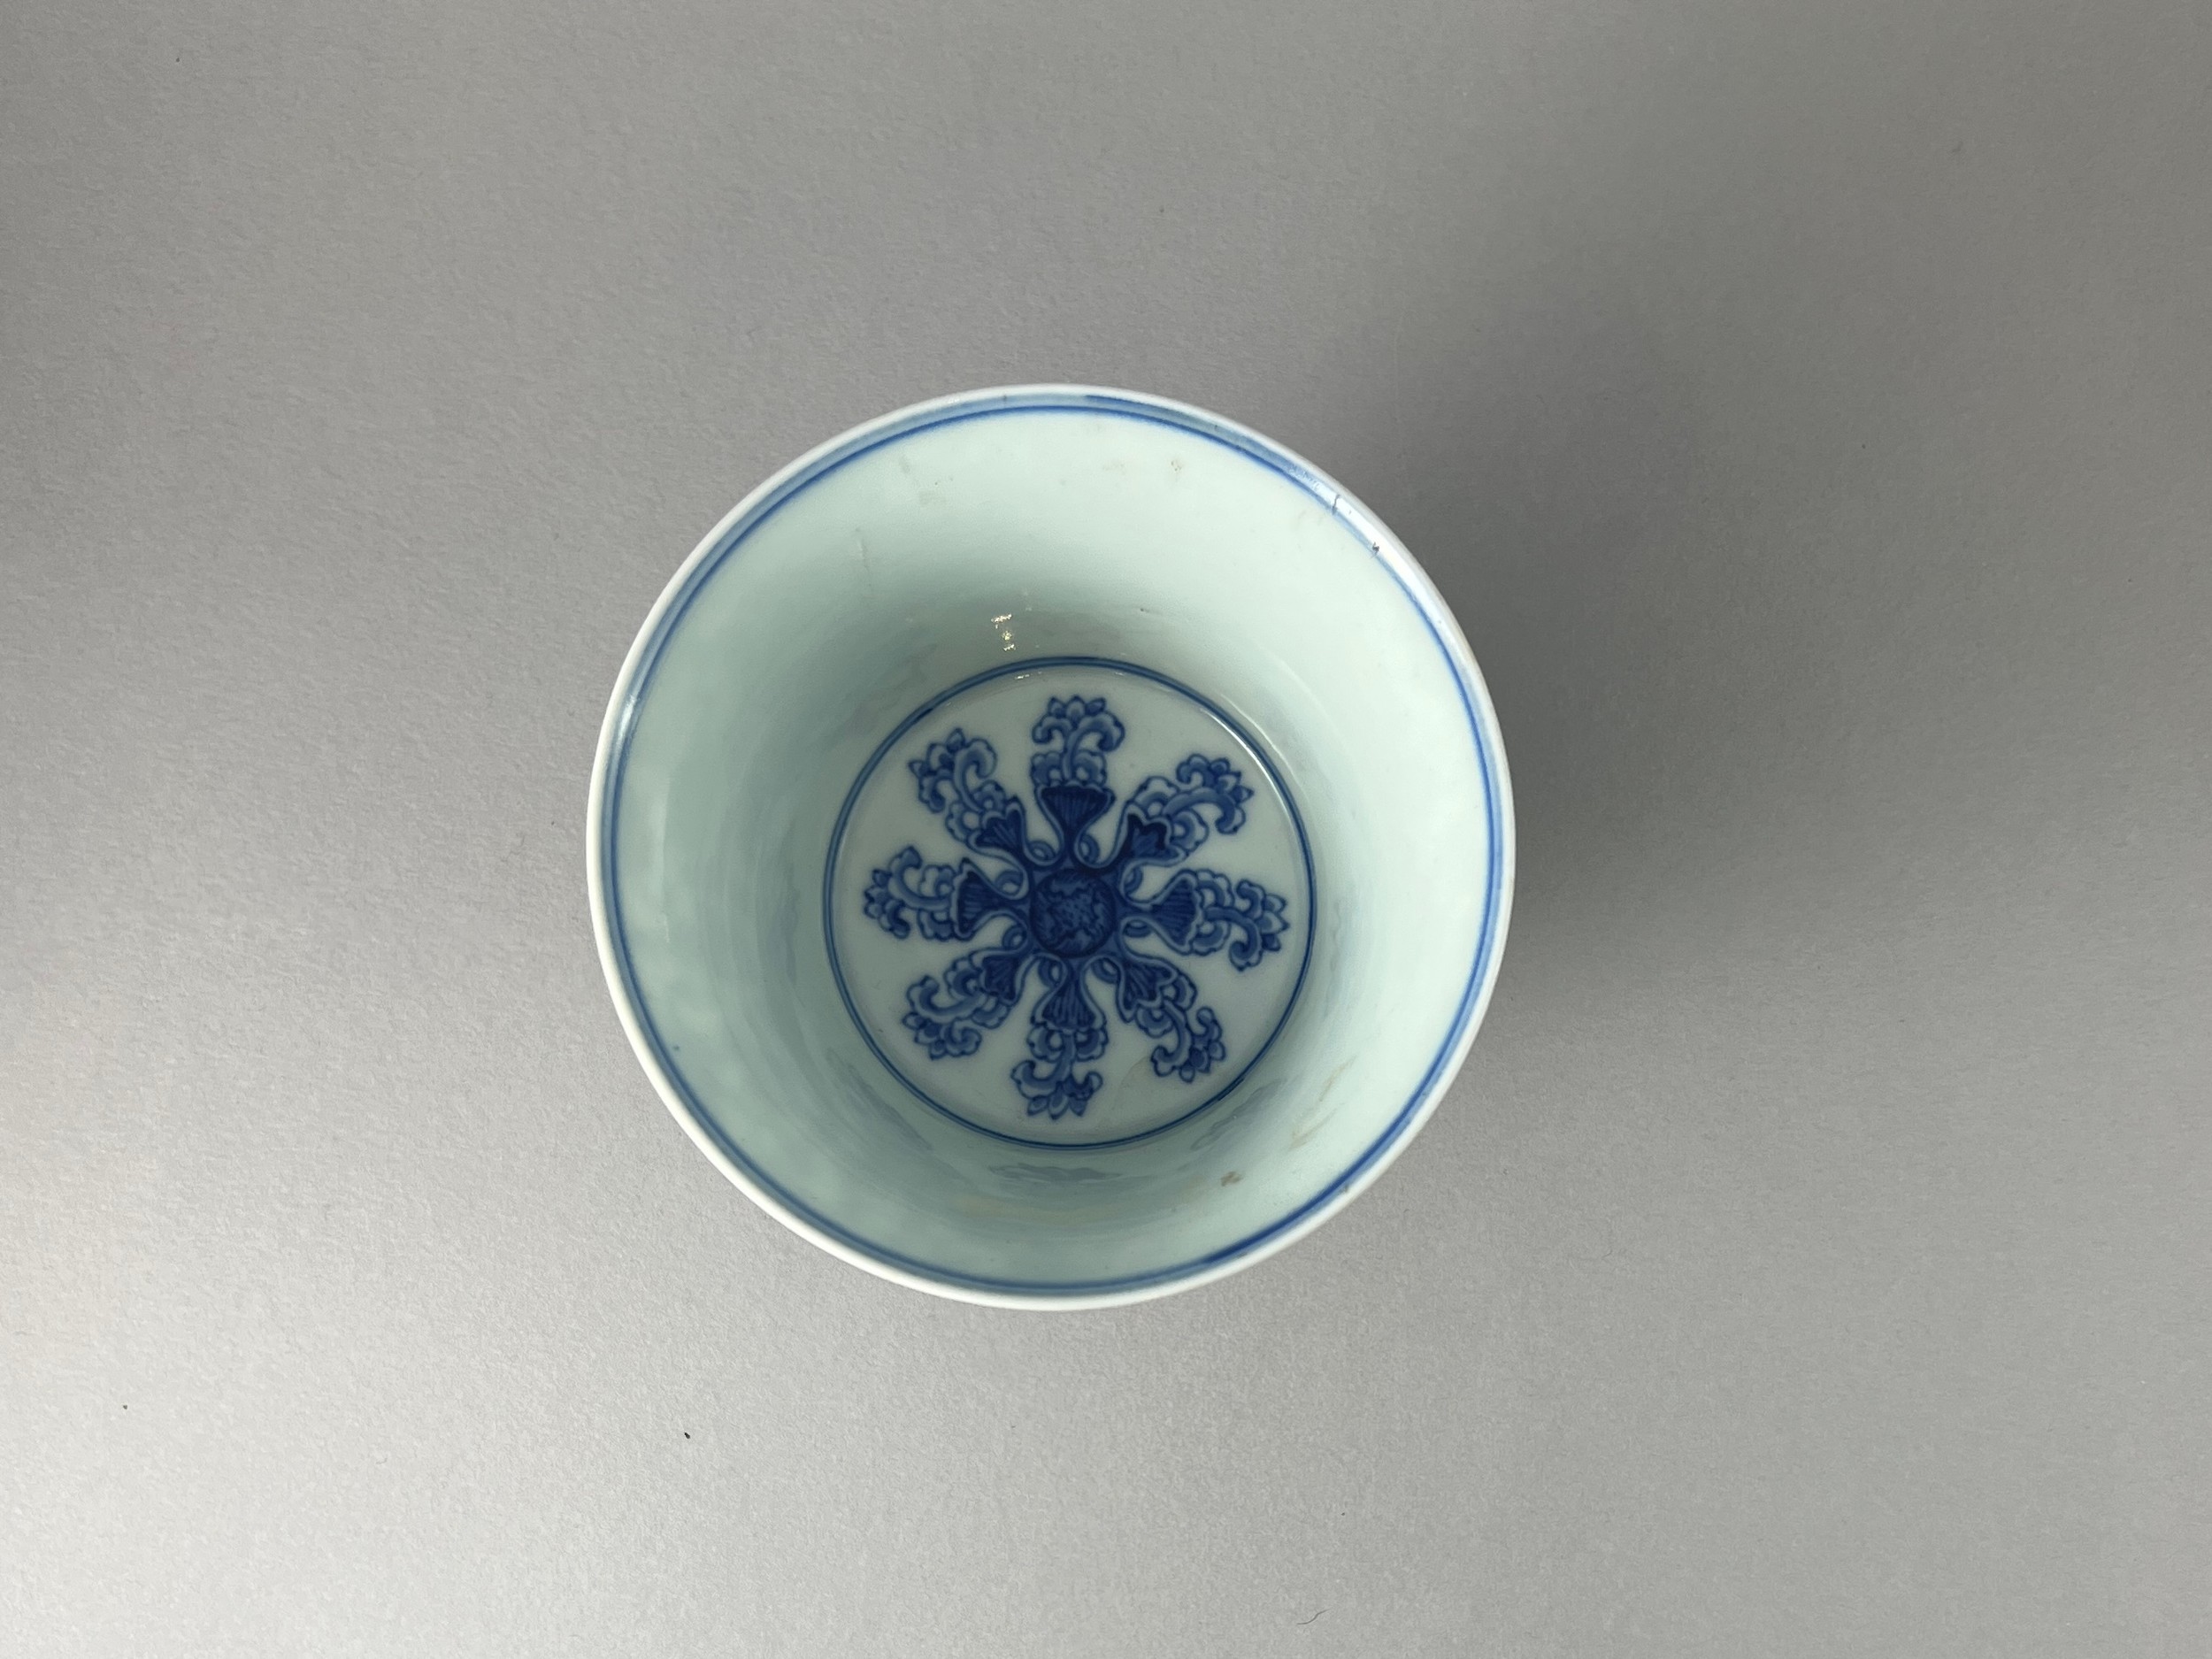 A Blue and White Stembowl, six character mark of Qianlong W:12.6cm well painted in Ming style, - Image 4 of 5